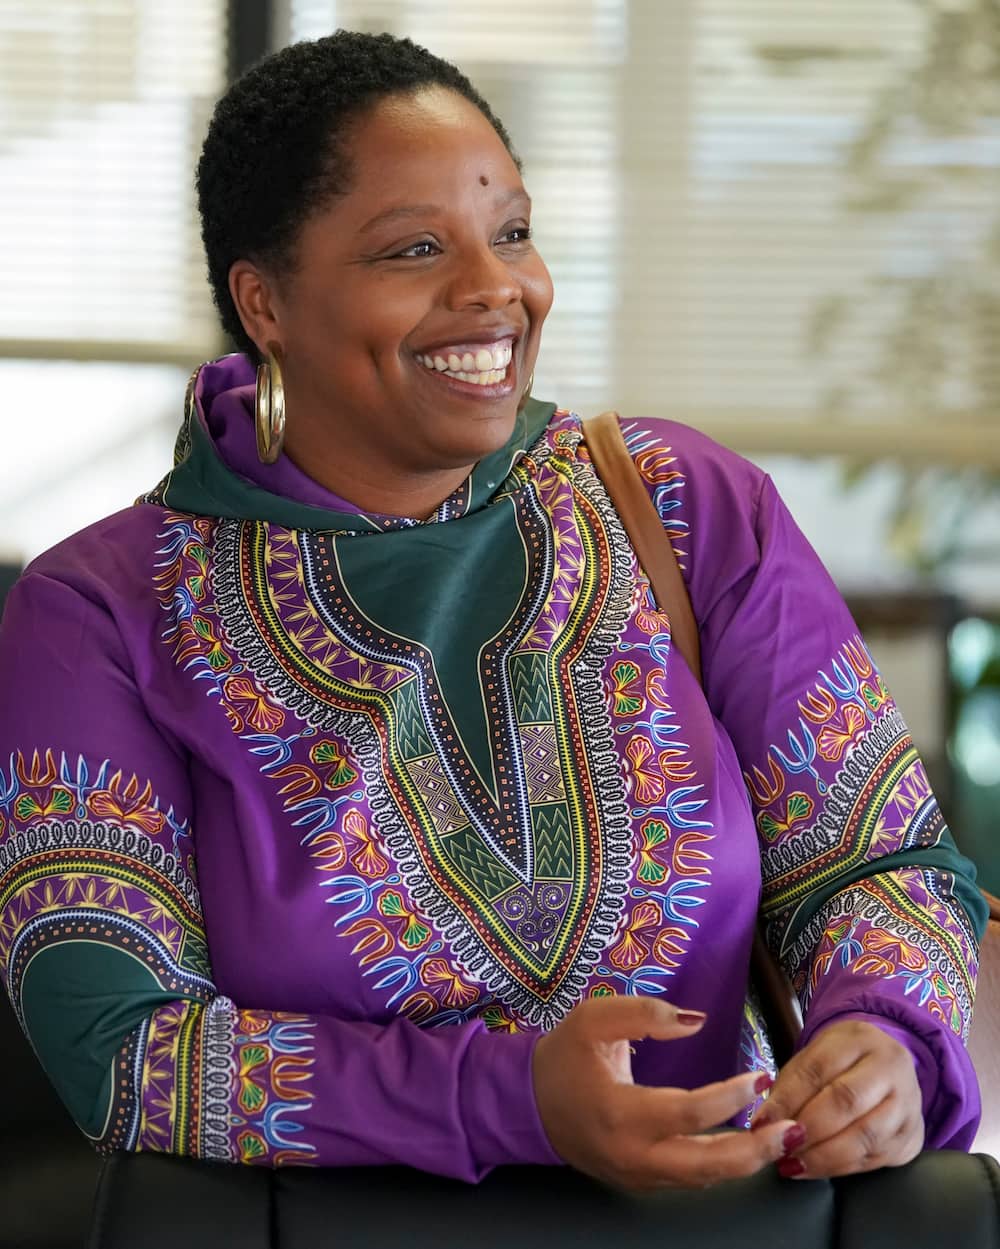 Patrisse Cullors' net worth, age, husband, movies and TV shows